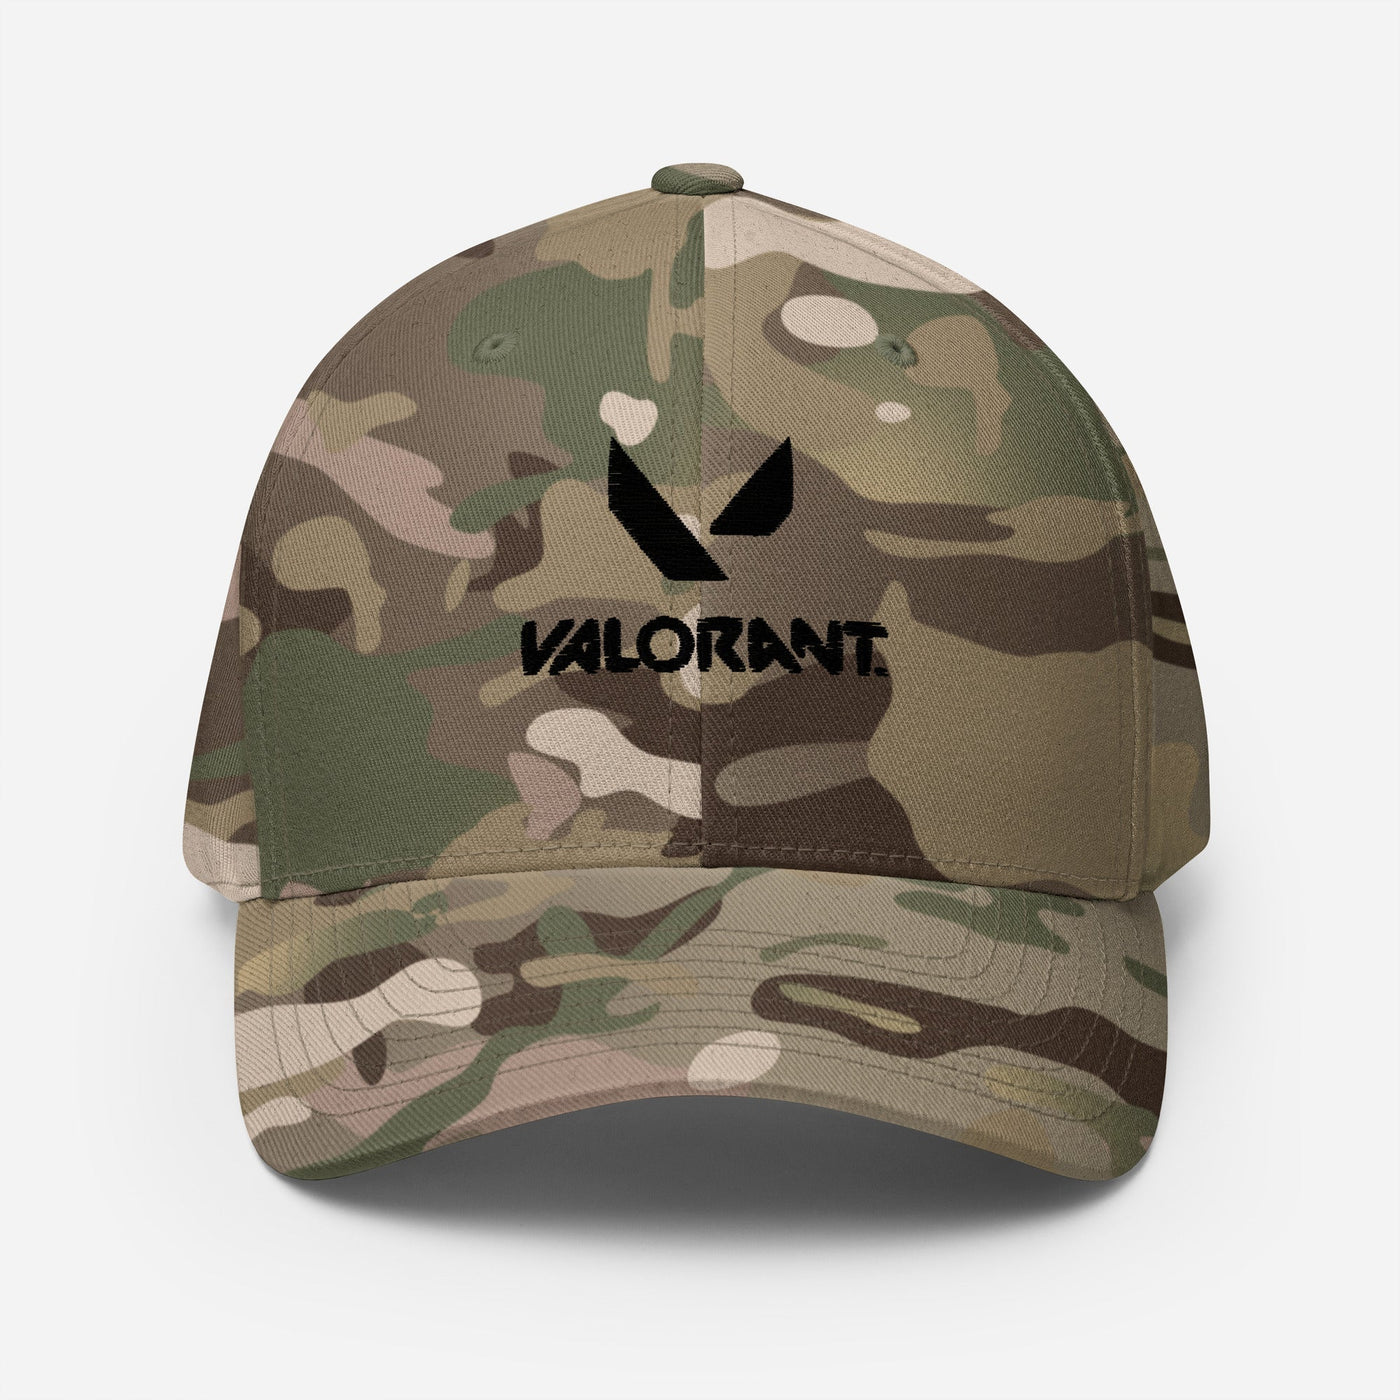 Valorant Embroidered flex-fit closed back hat Gapo Goods